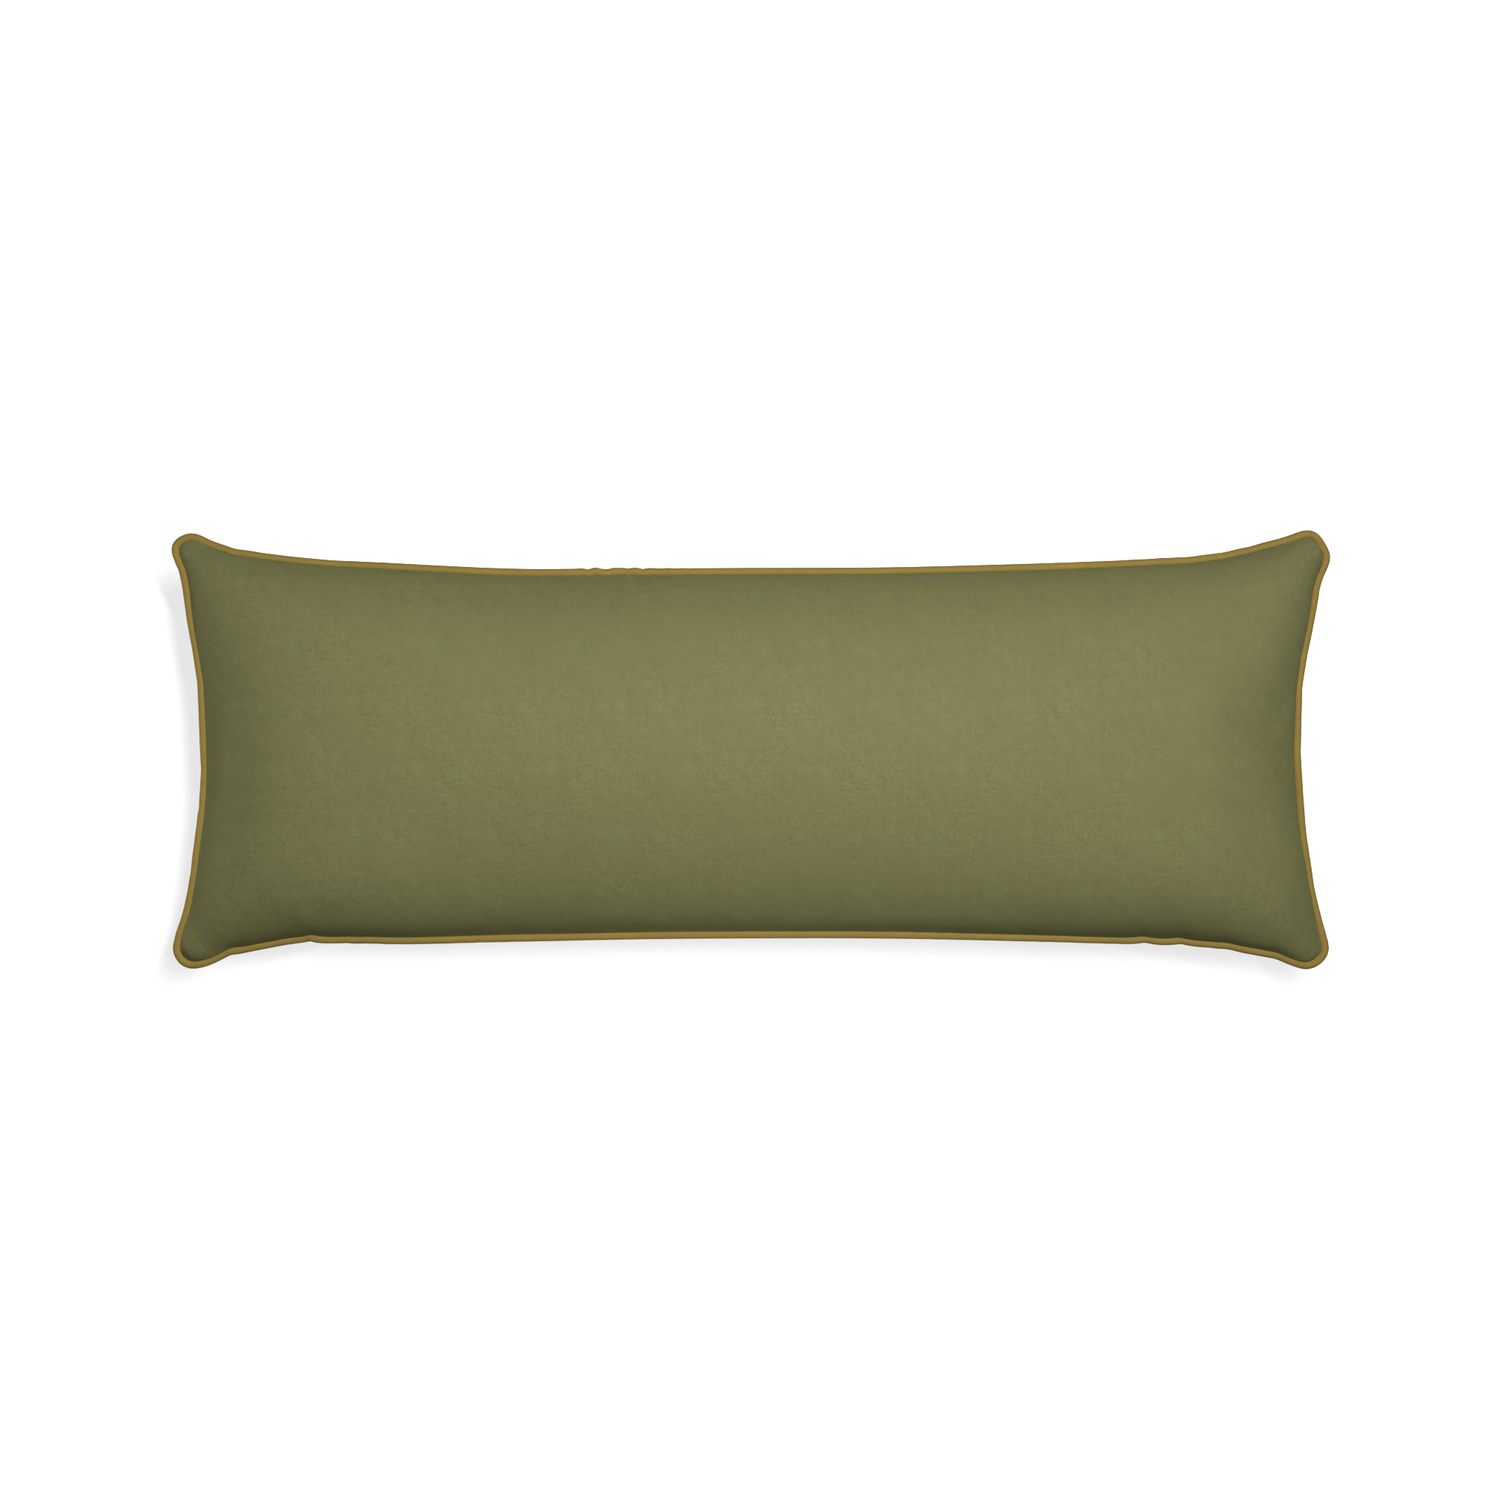 Xl-lumbar moss custom moss greenpillow with c piping on white background